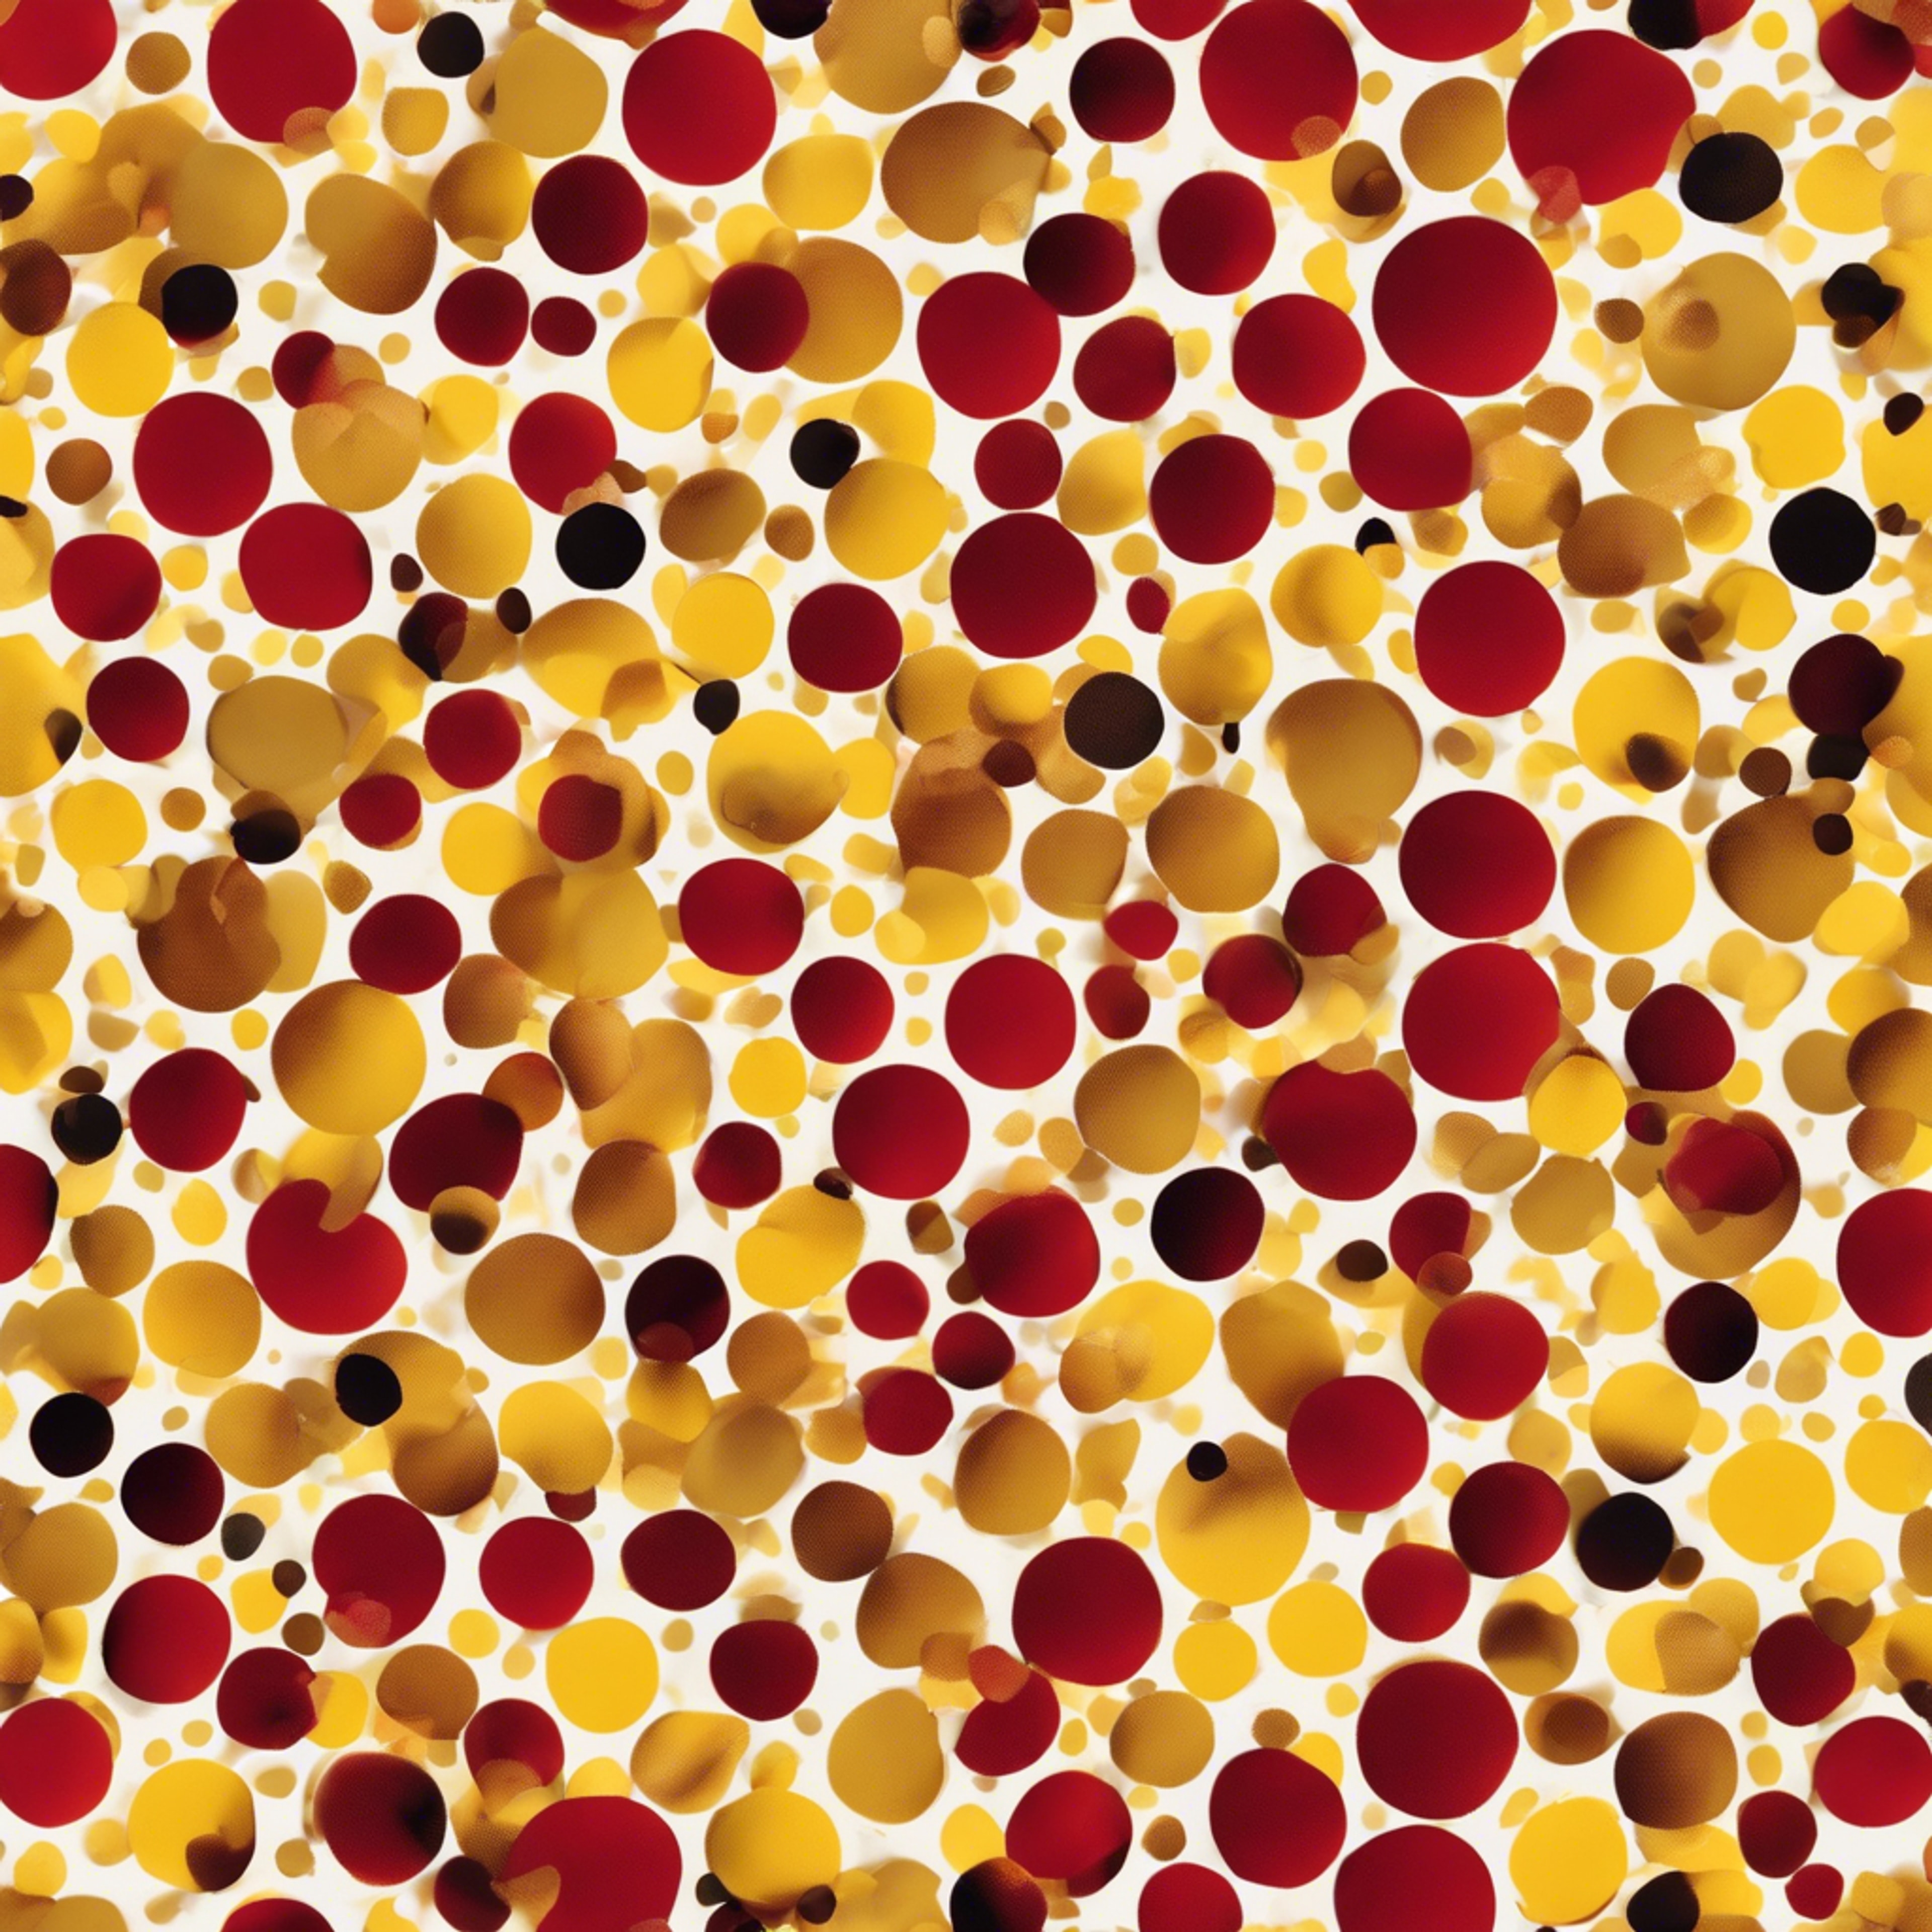 Red and yellow polka dots peppered cheerfully across a seamless pattern.壁紙[809bb738b8014084ac82]